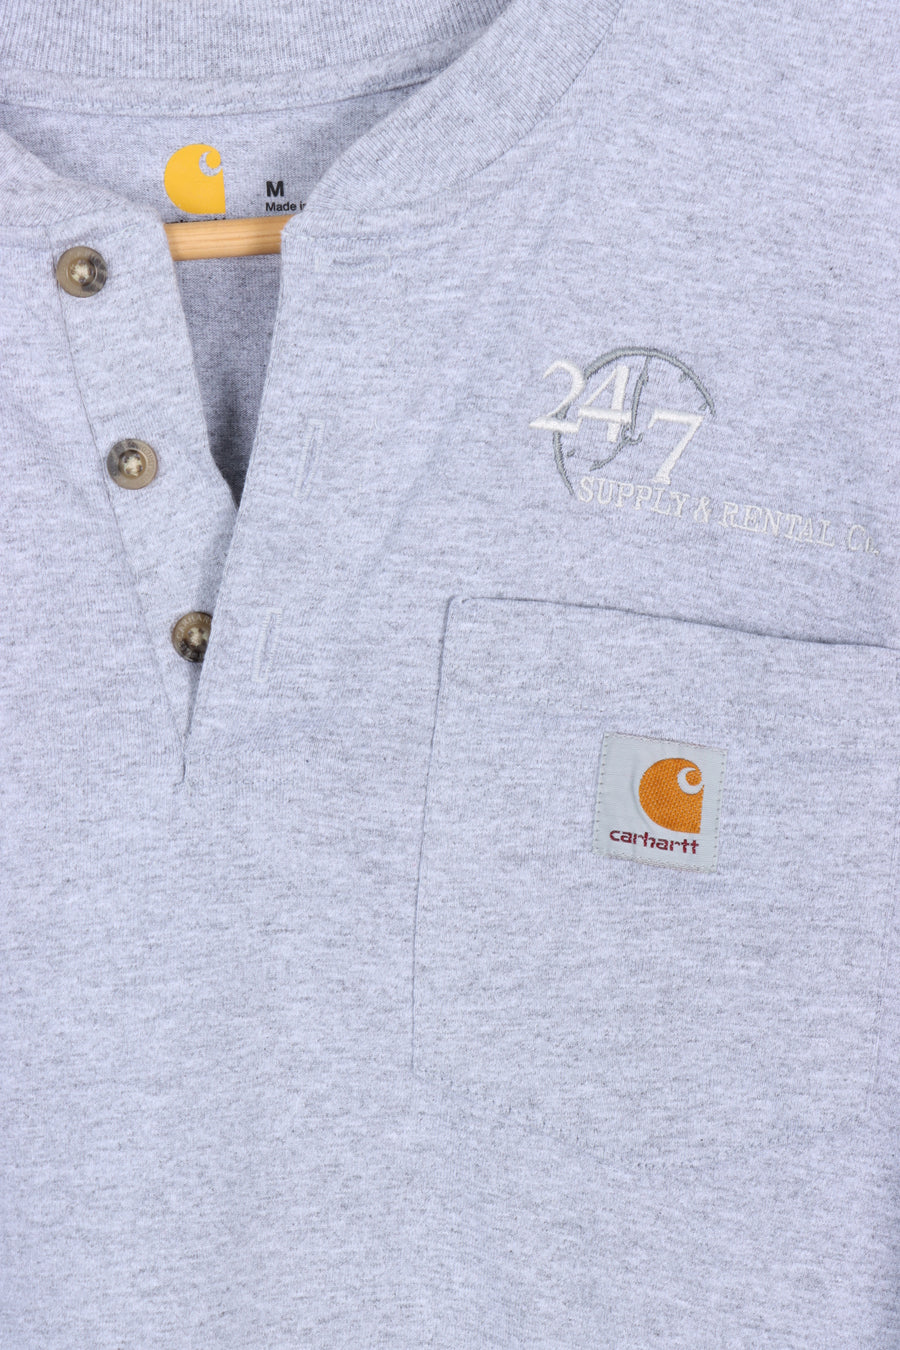 CARHARTT Grey Marle Embroidered 1/4 Button Pocket Tee (M-L)